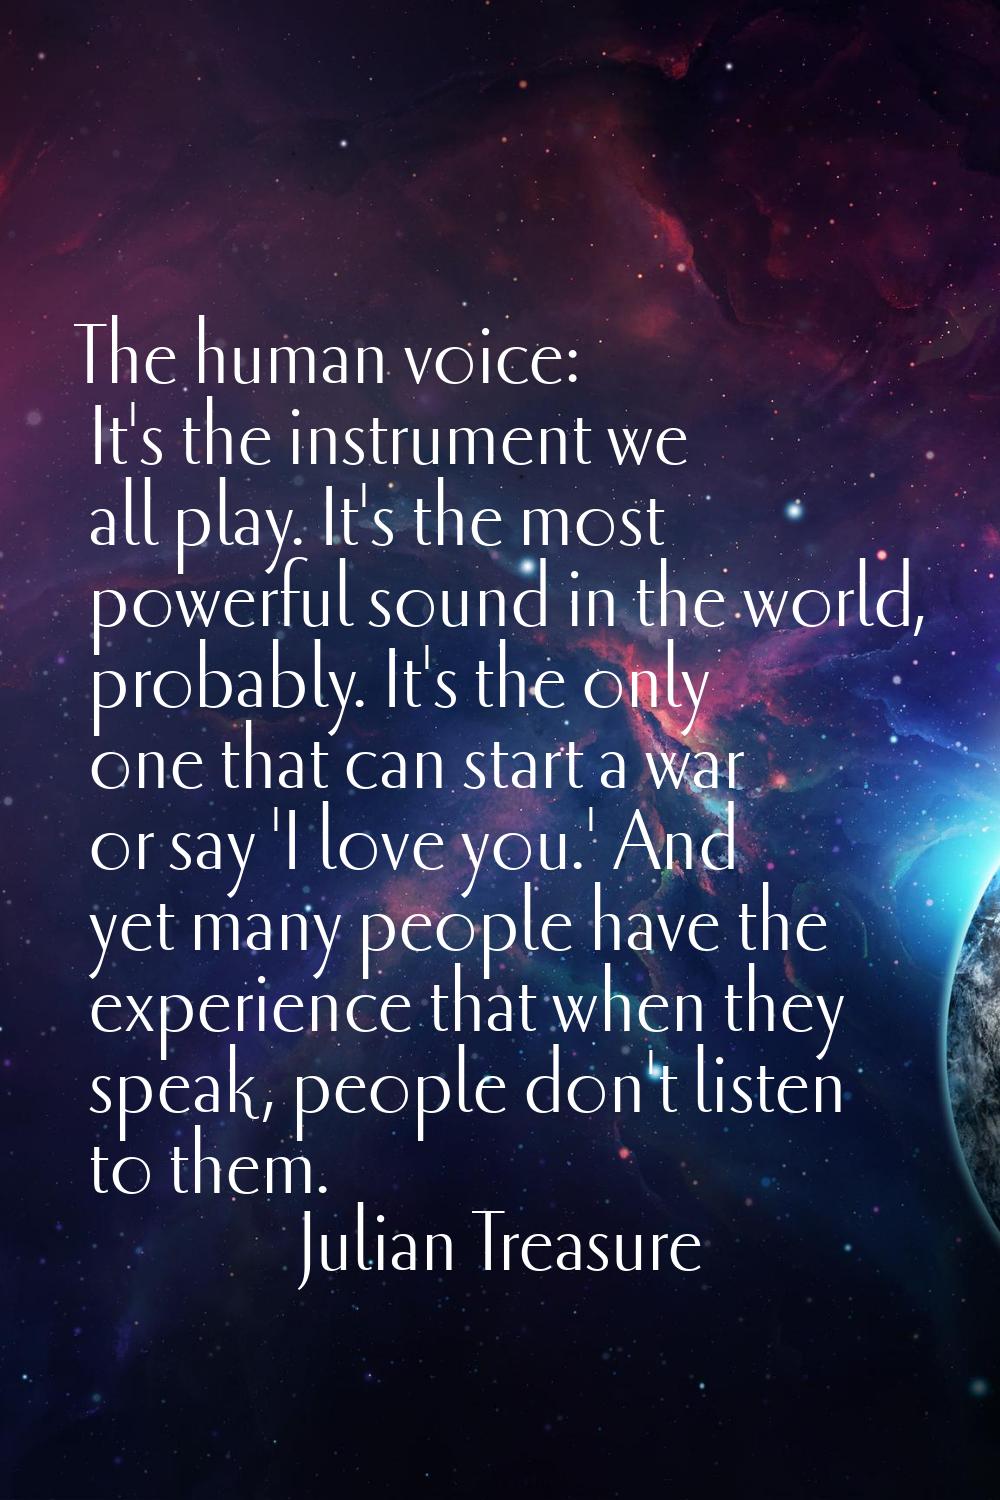 The human voice: It's the instrument we all play. It's the most powerful sound in the world, probab